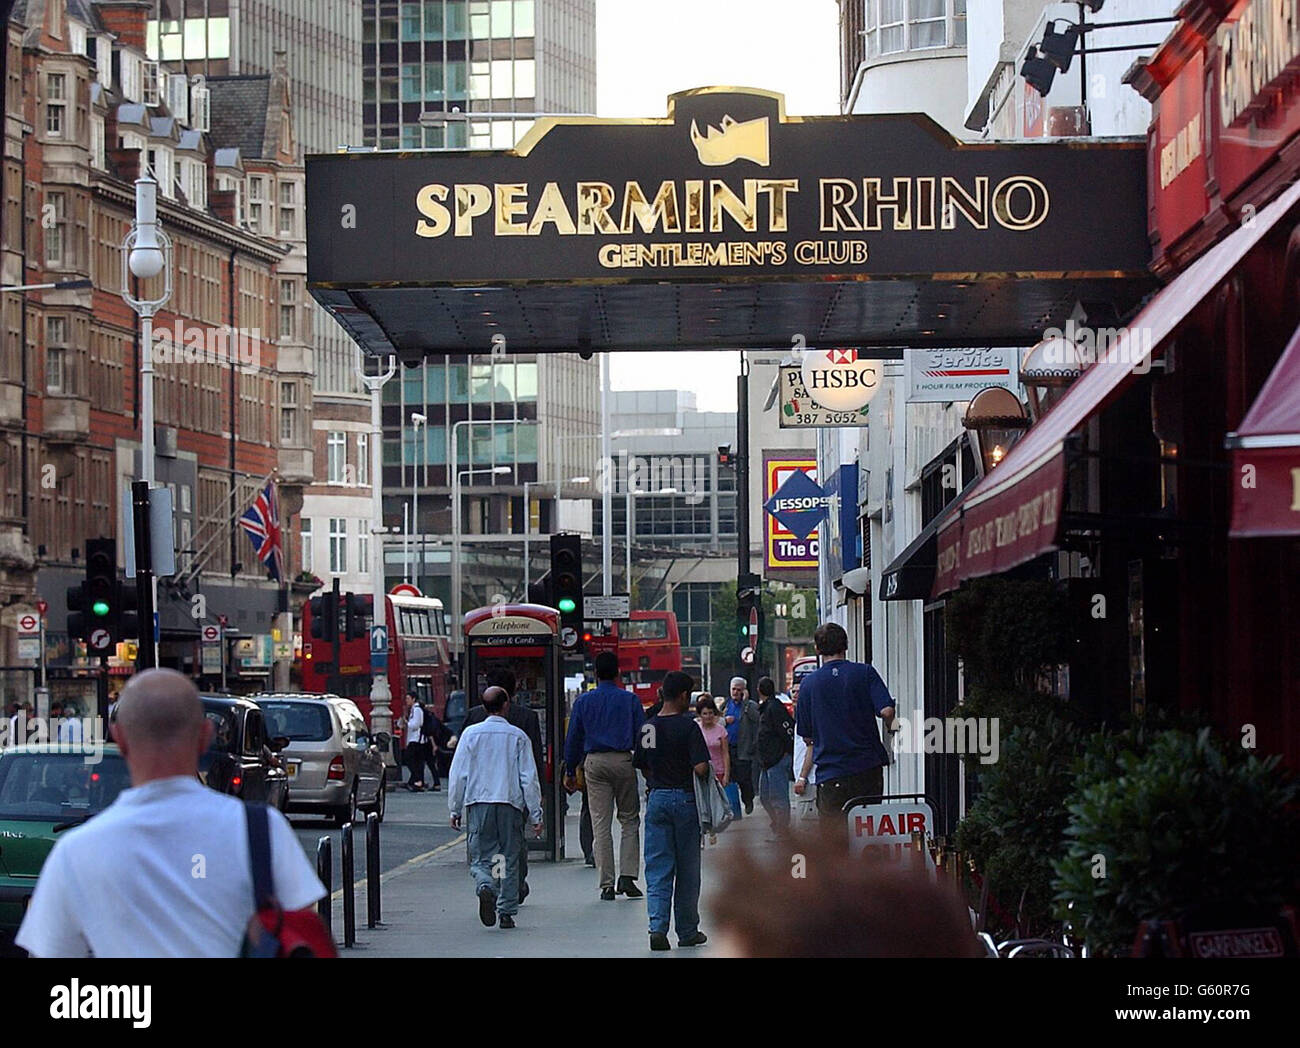 The Spearmint Rhino, in Tottenham Court Road, central London. The flagship lap-dancing club faces losing its liquor licence amid police allegations of indecent conduct on its premises. *The world famous Spearmint Rhino gentlemen's club which is popular with celebrities and City traders, is at the centre of a probe by Scotland Yard's Clubs and Vice Unit. Stock Photo